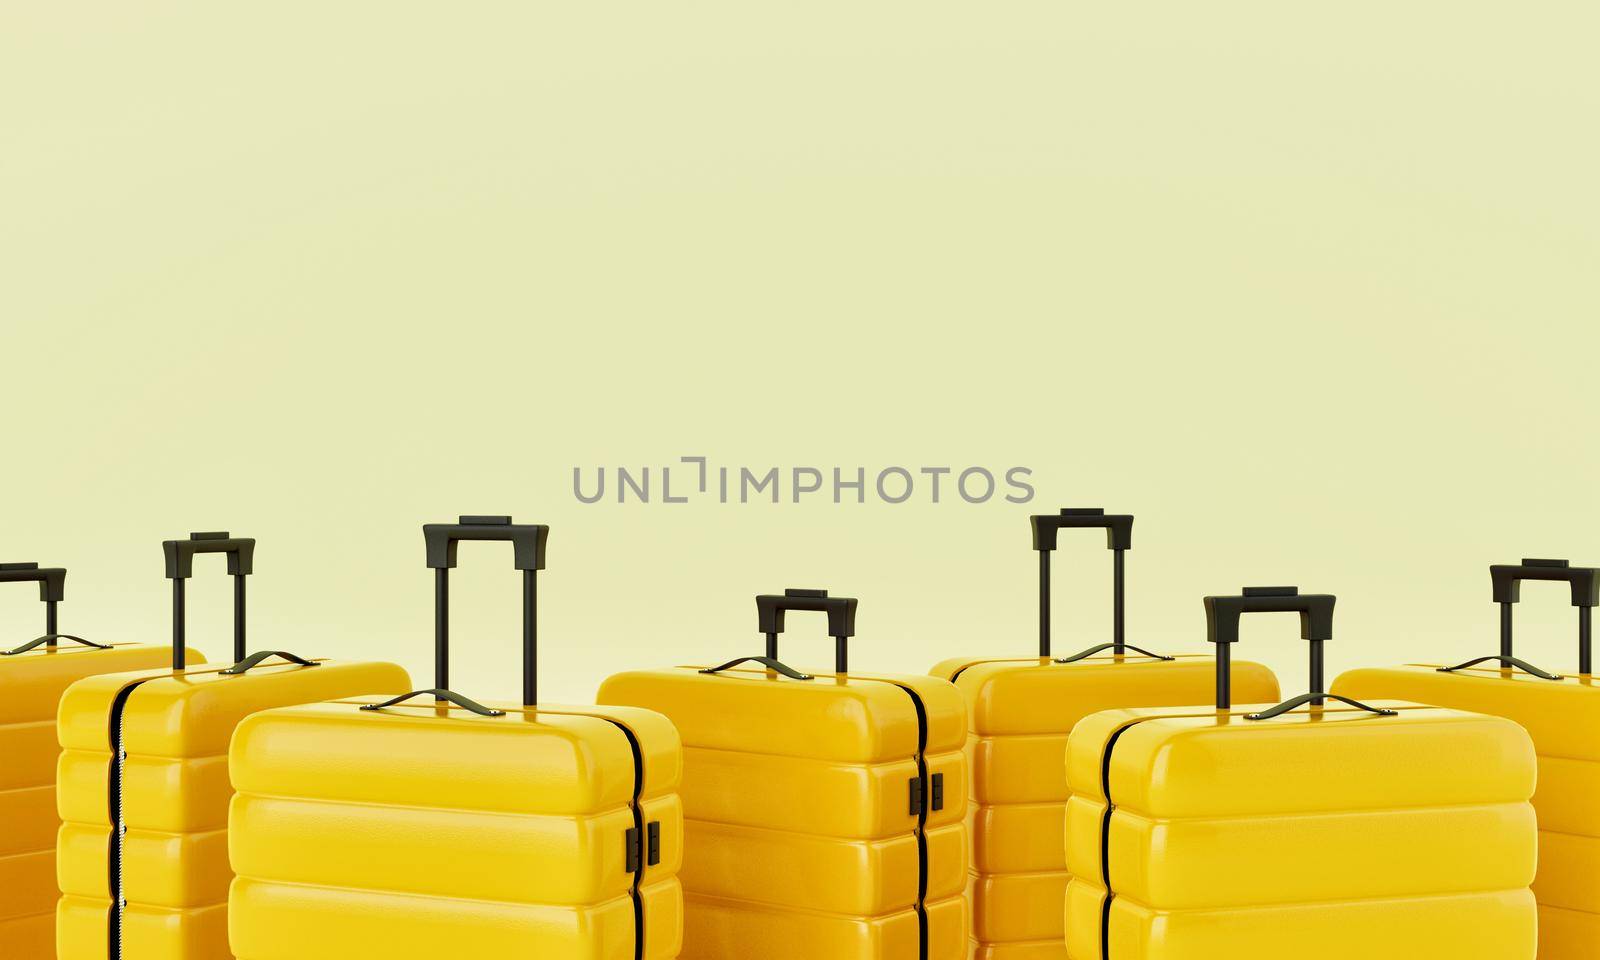 Group of yellow trolley suitcases on isolated background. Travel object and wanderlust concept. 3D illustration rendering